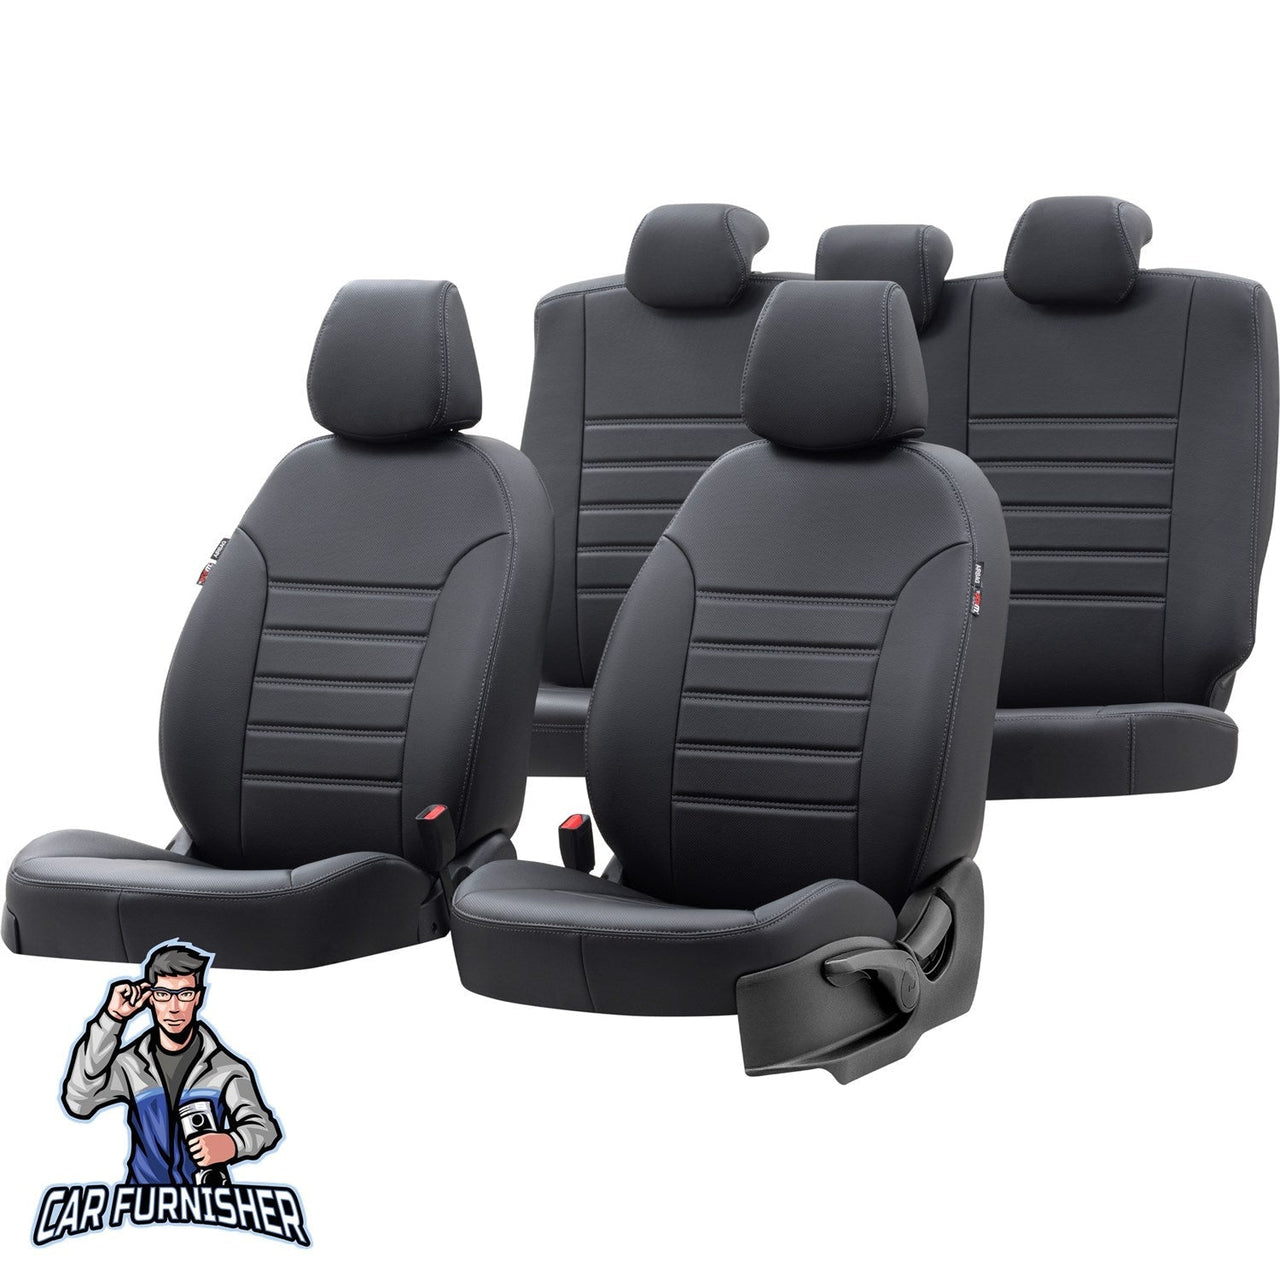 Ford Transit Custom Seat Covers Istanbul Leather Design Black Leather